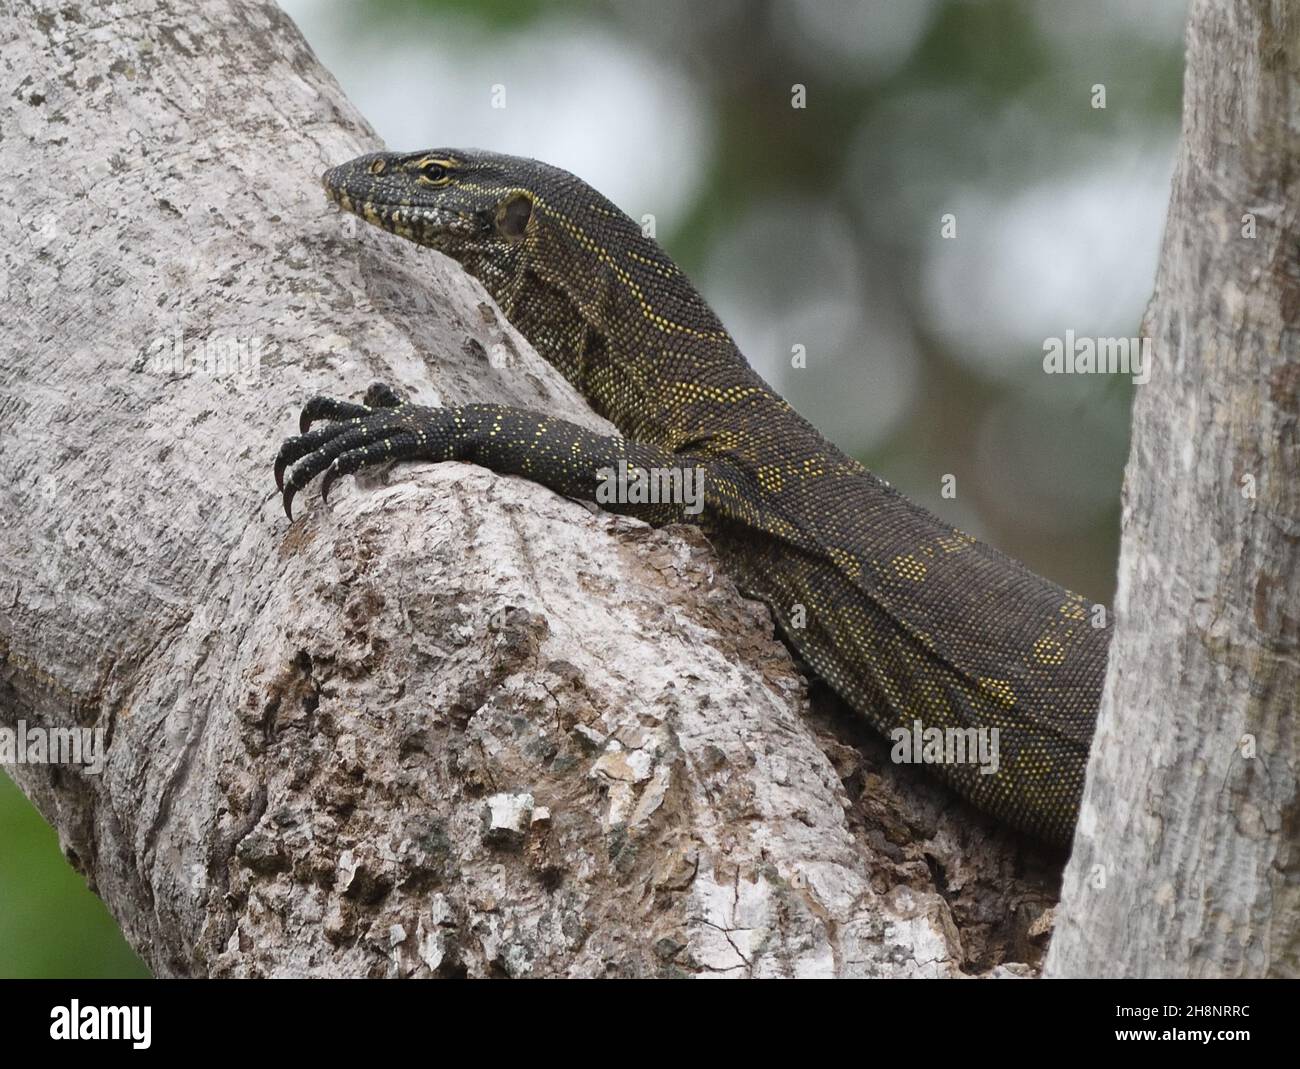 A Nile monitor (Varanus niloticus) climbs a tree in the Abuko National Park nature reserve. Abuko, The Republic of the Gambia. Stock Photo